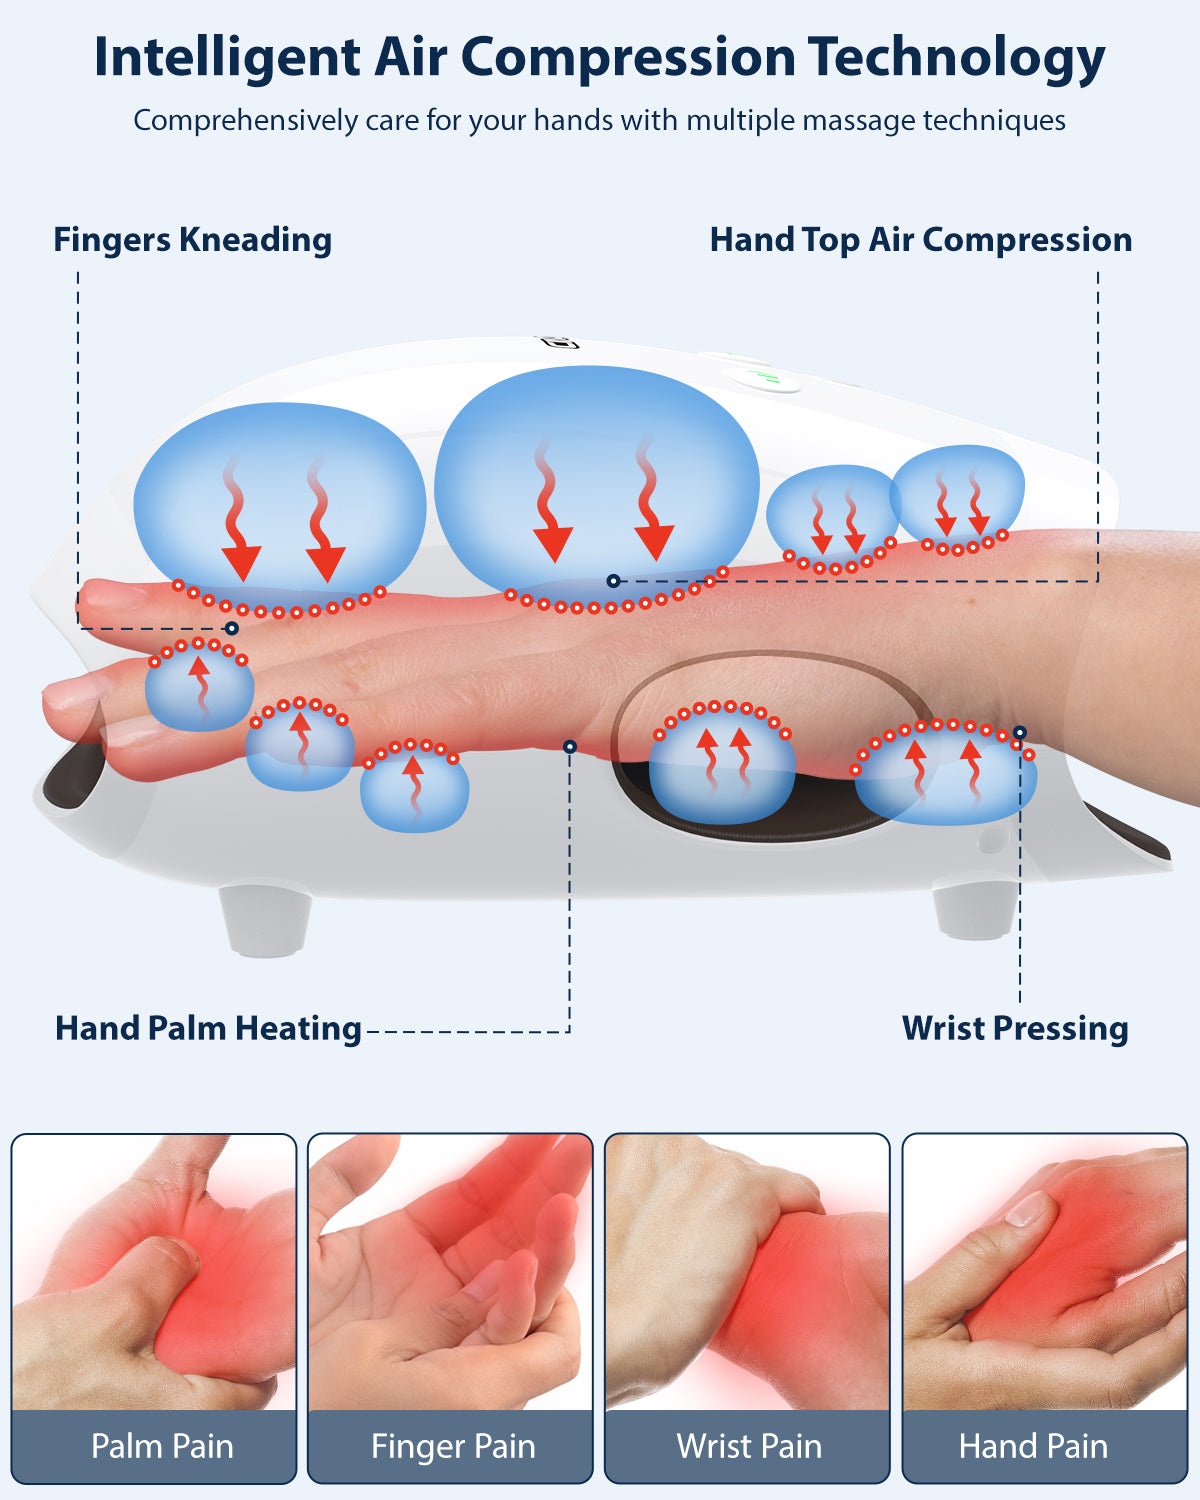 CINCOM Hand Massager - Cordless Hand Massager with Heat and Compression for